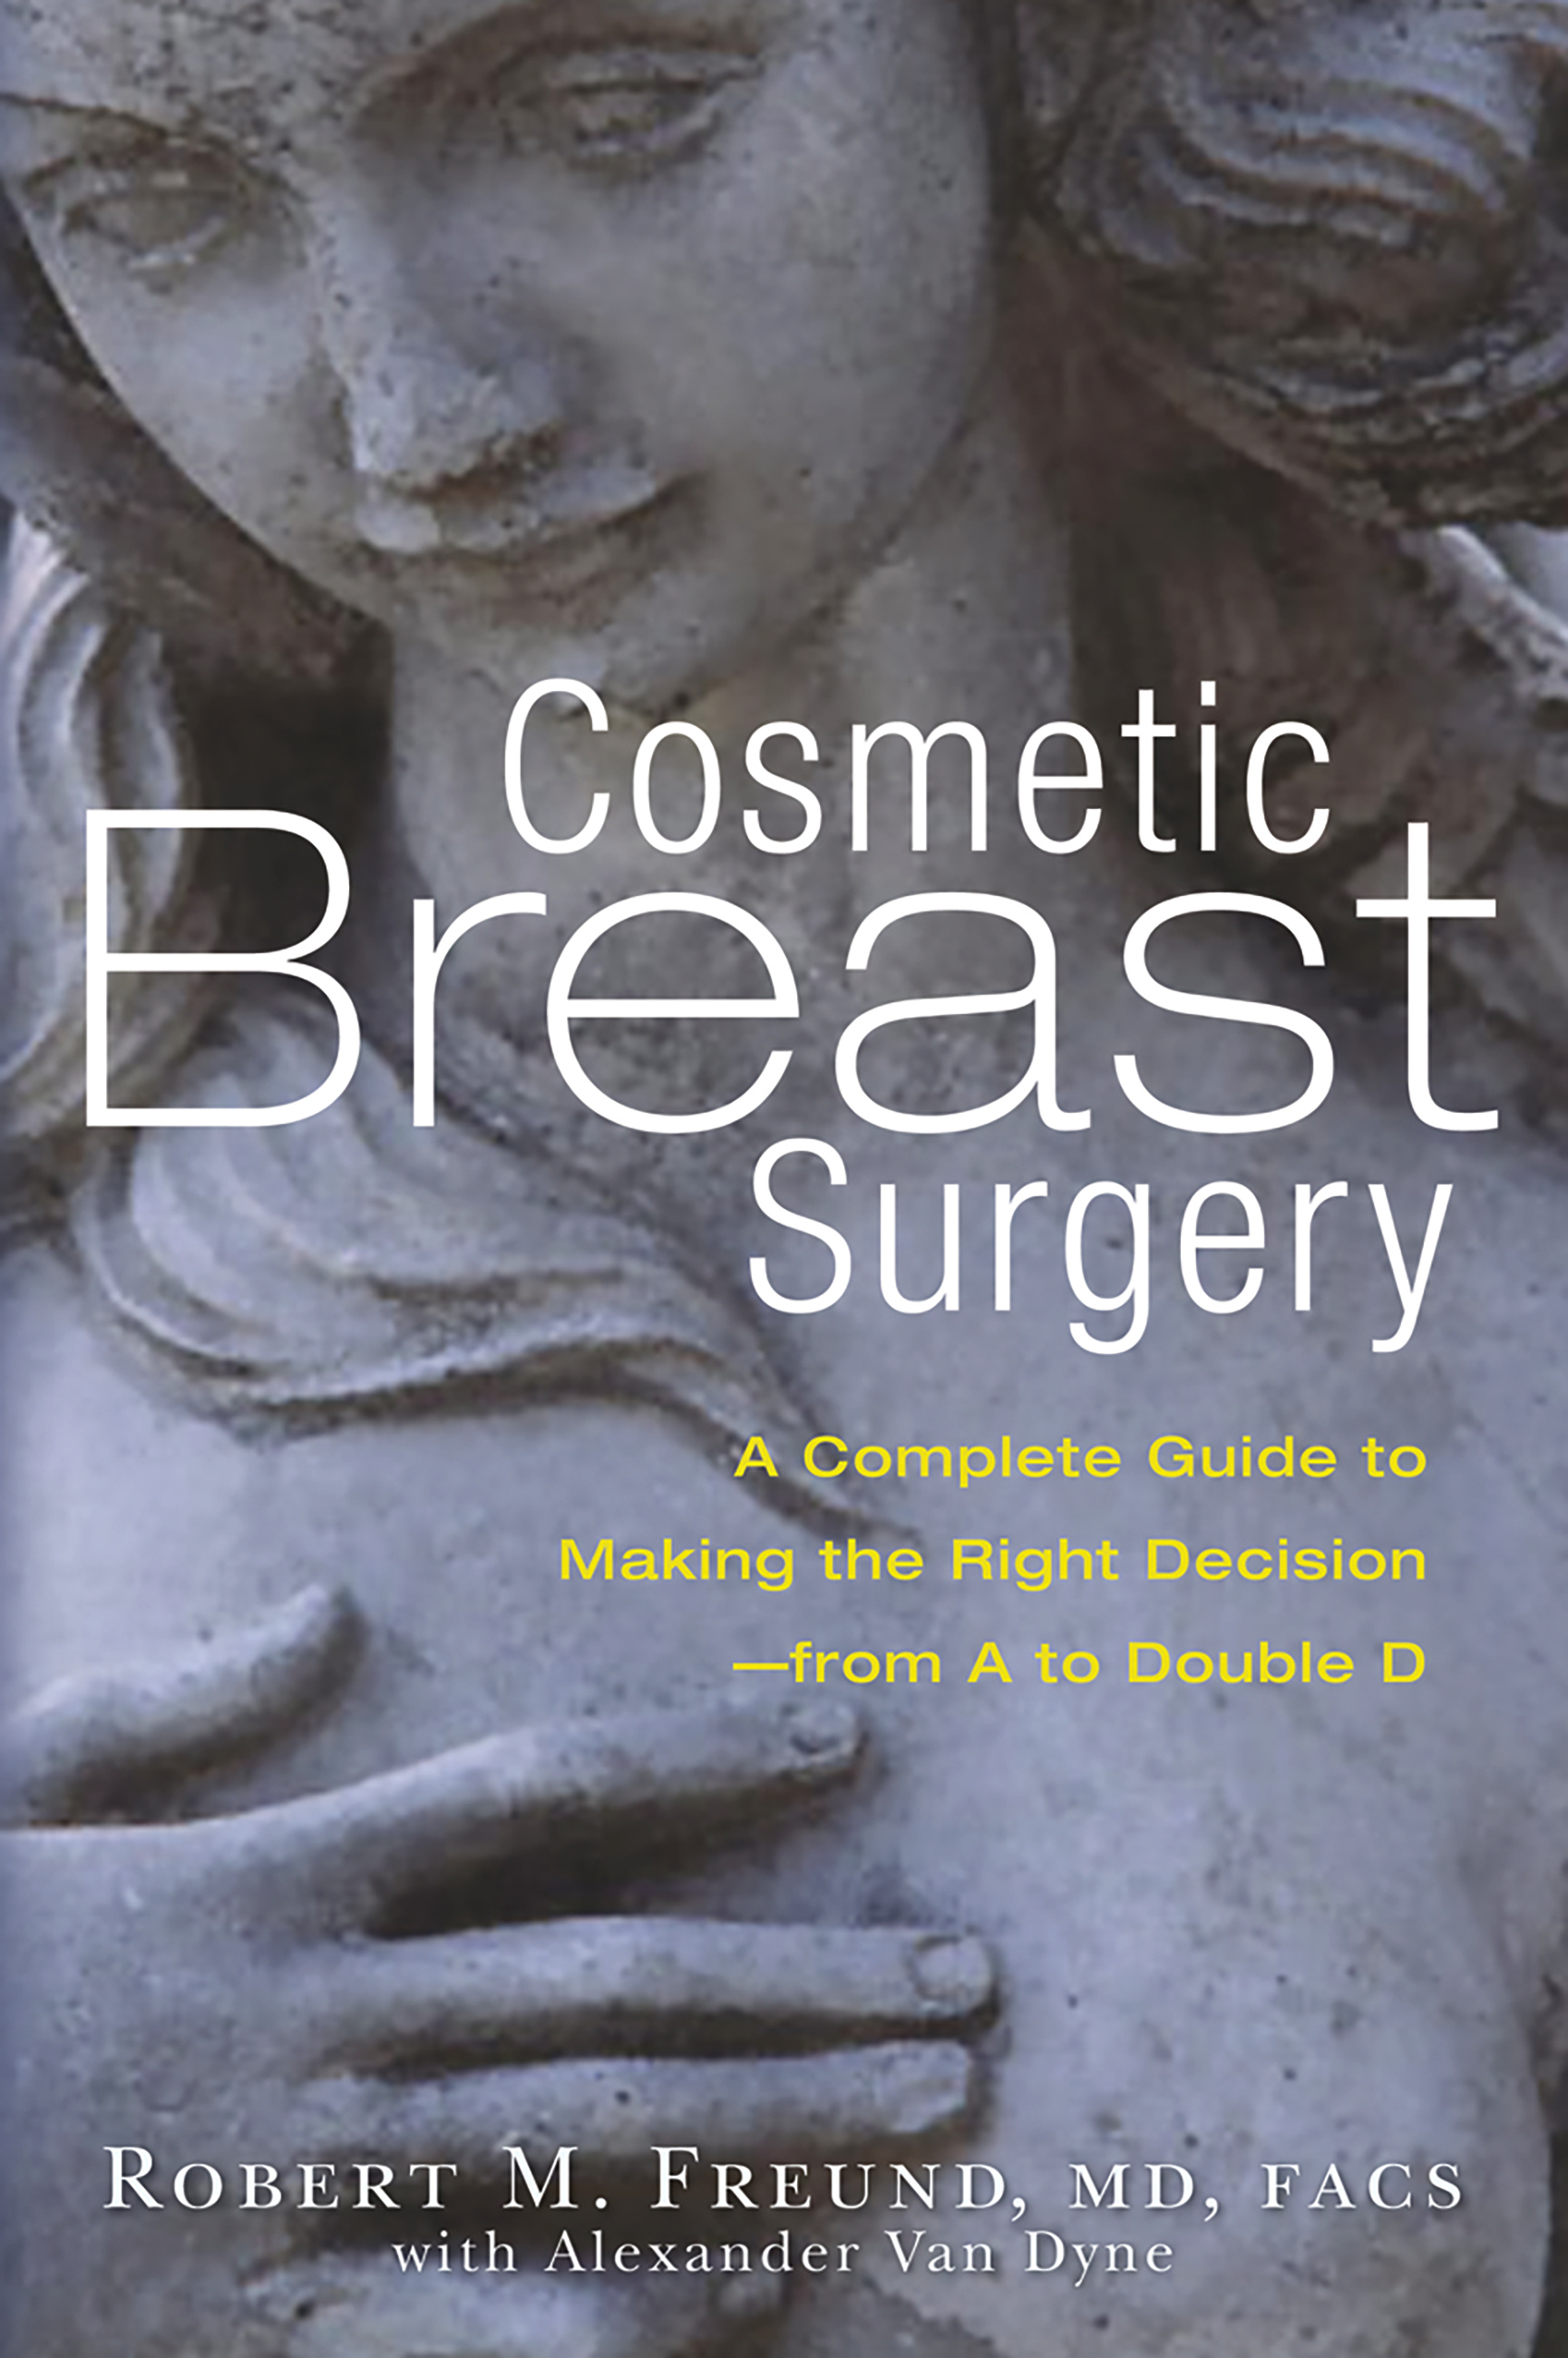 Cosmetic Breast Surgery by Robert M. Freund